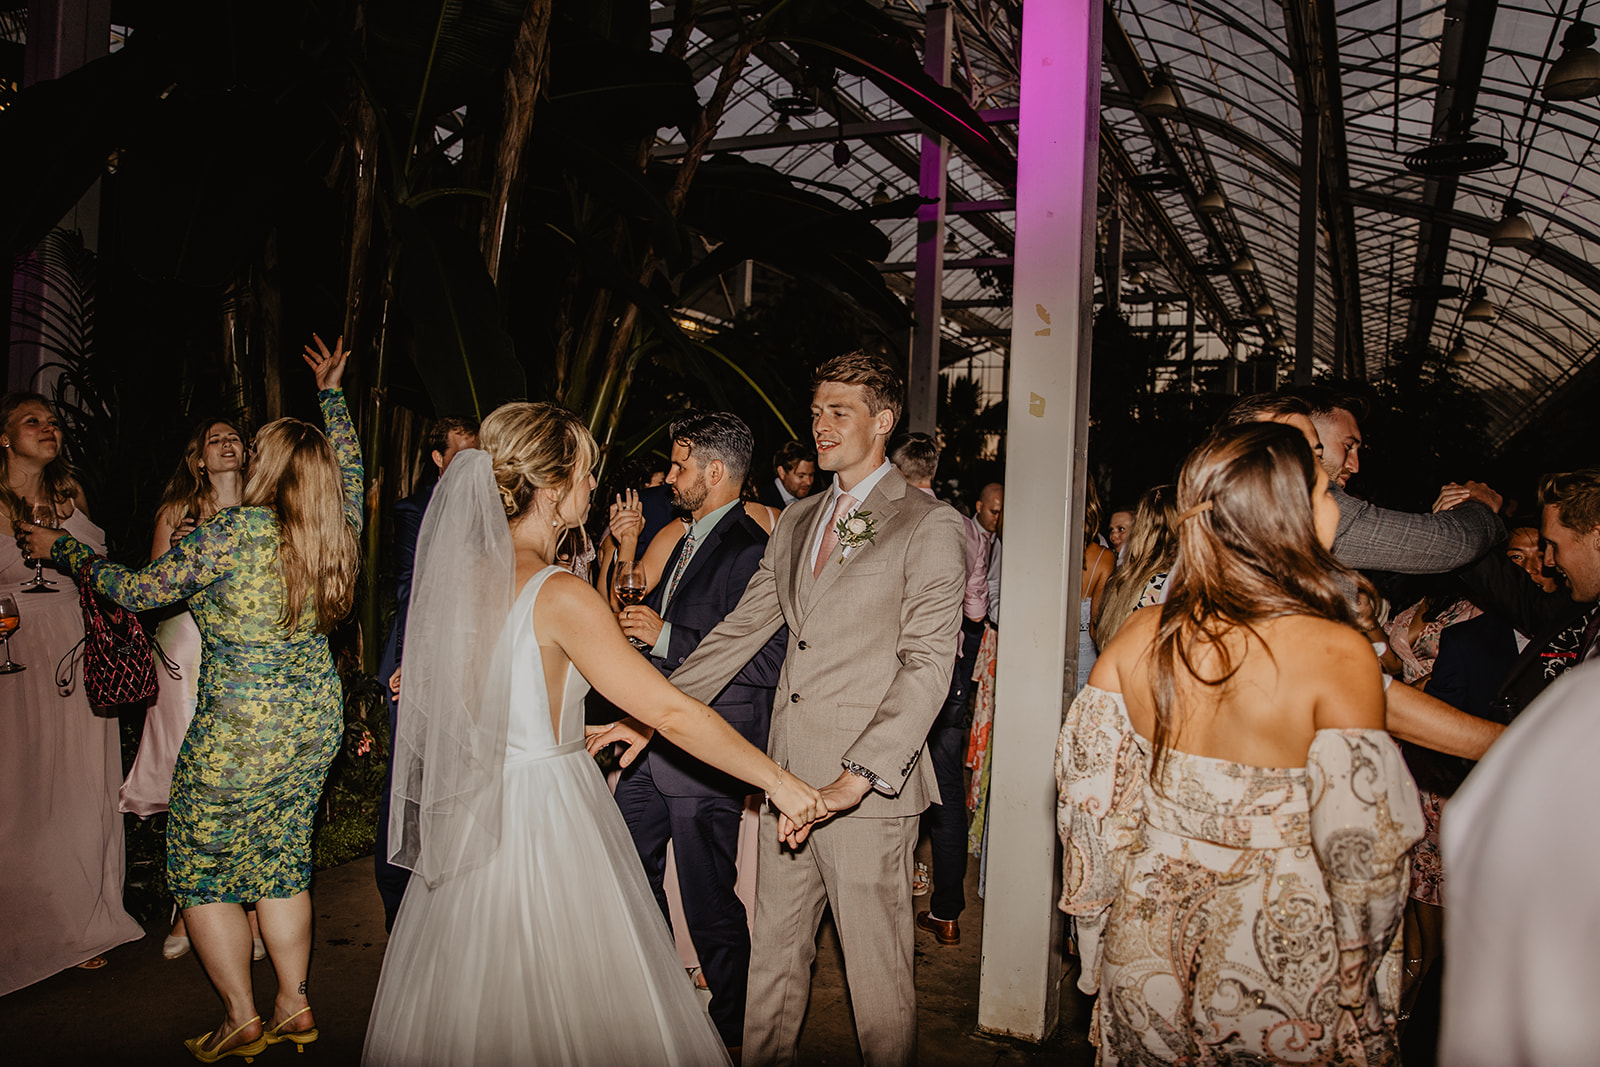 Bride and groom dancing at a RHS Gardens Wisley Wedding. By Olive Joy Photography